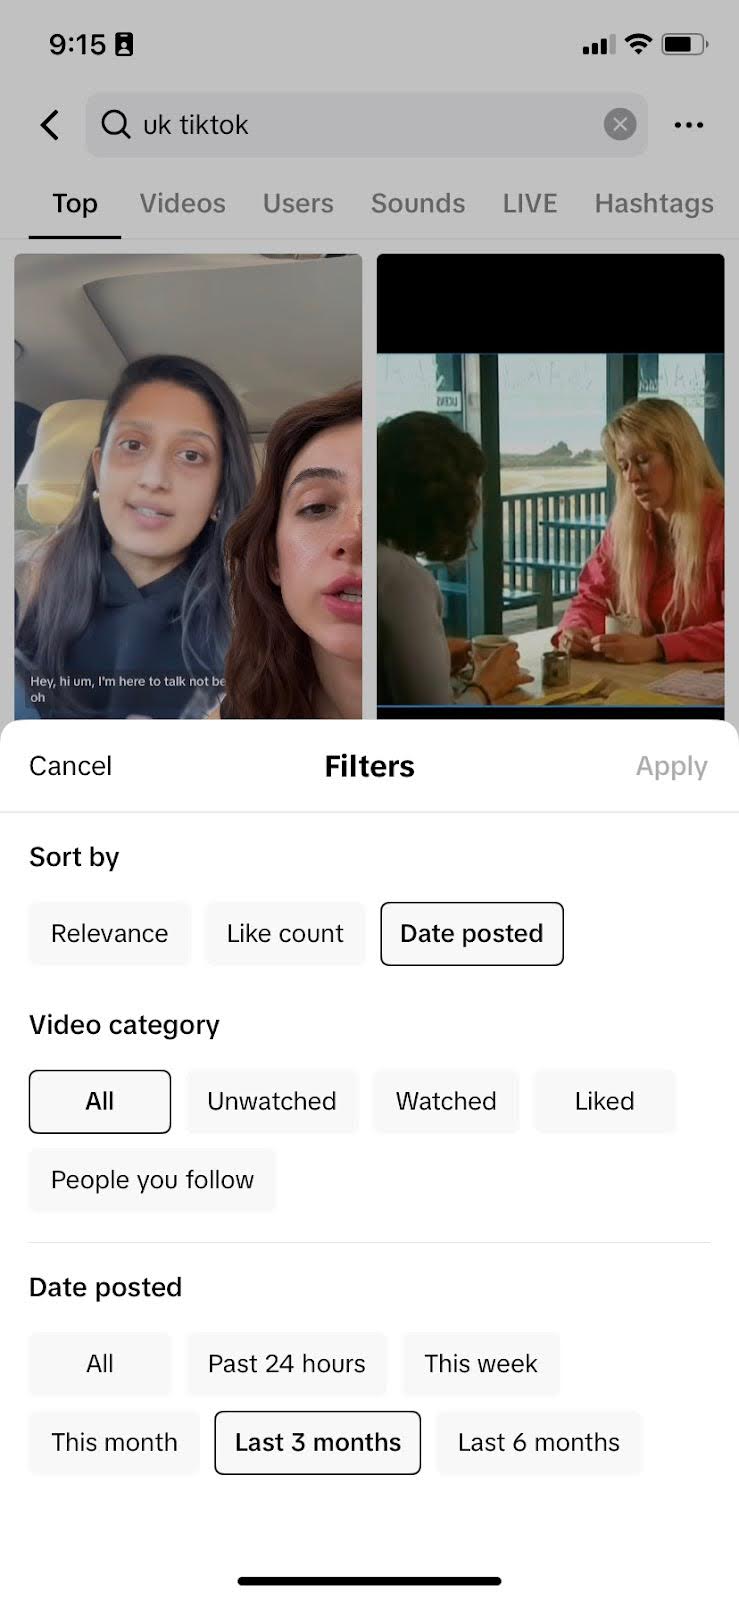 Find UK TikTok Influencers for your brand